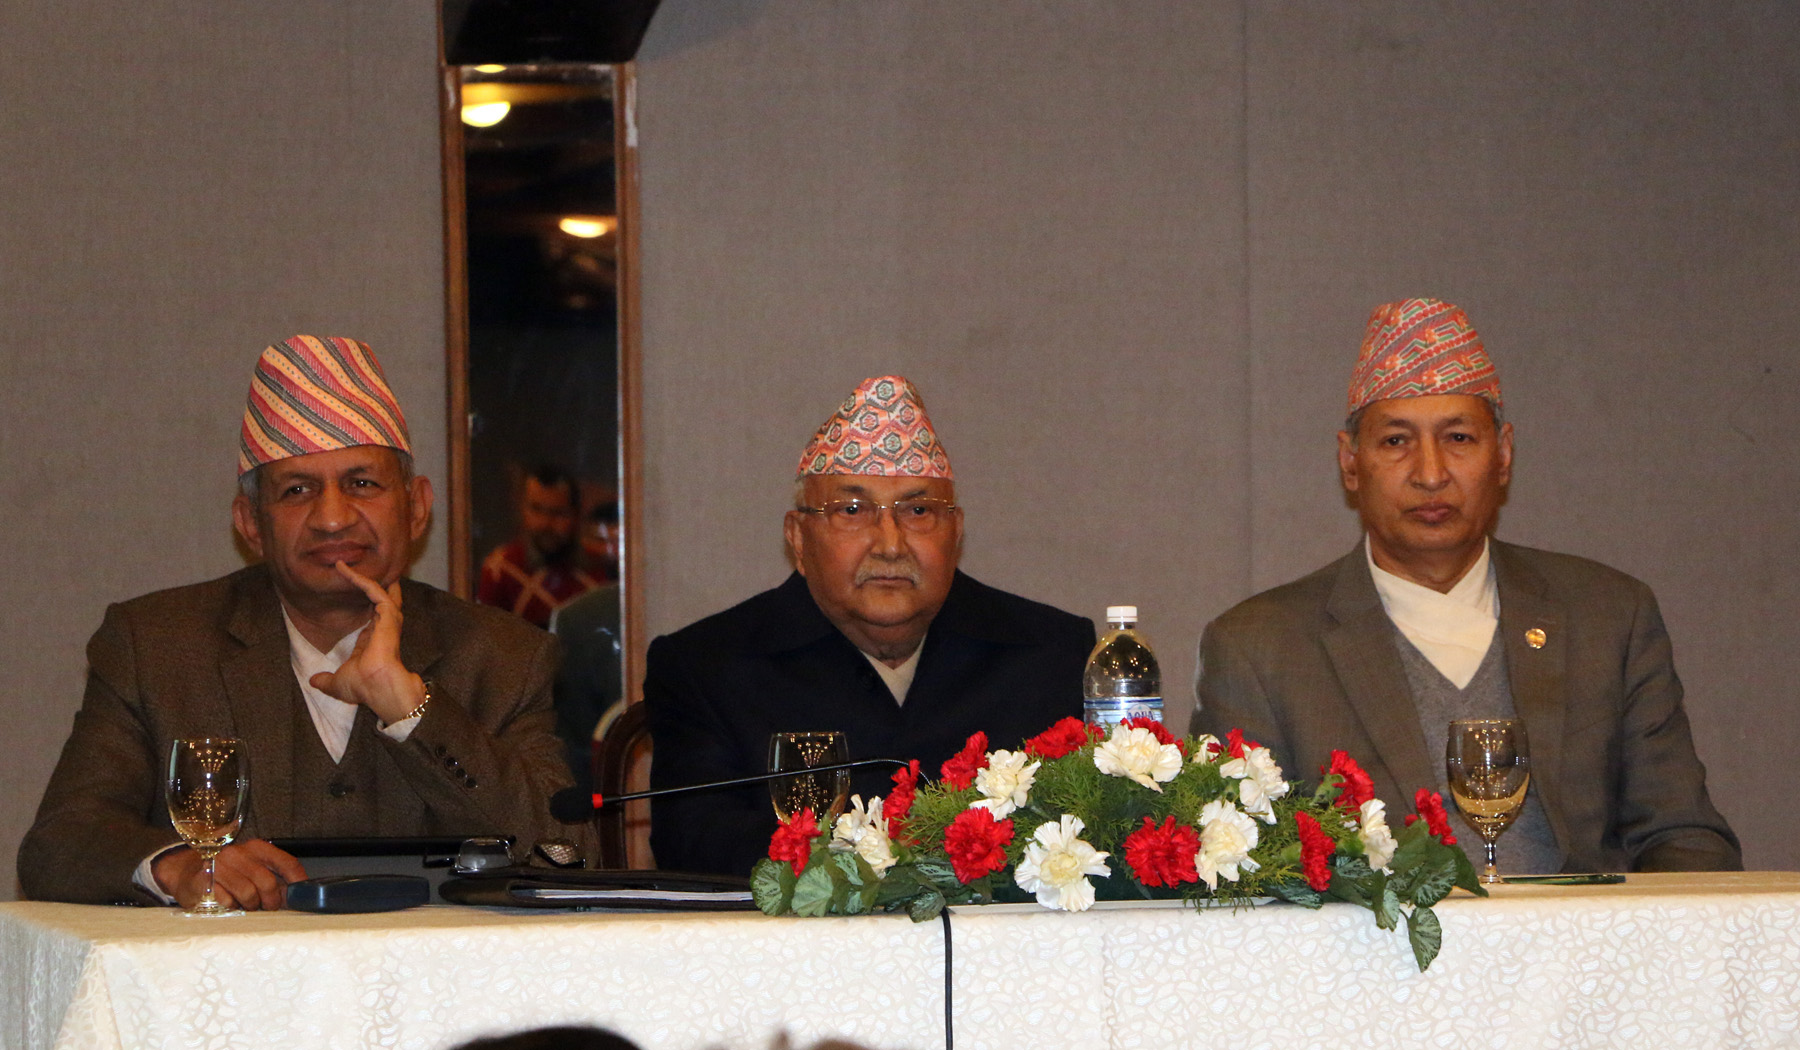 Prime Minister KP Sharma Oli, Minister for Foreign Affairs Pradeep Kumar Gyawali and Minister of Finance Yubaraj Khatiwada participate in a programme organised to brief diplomatic community, at Ministry of Foreign Affairs on Friday, February 1, 2019. Photo: RSS